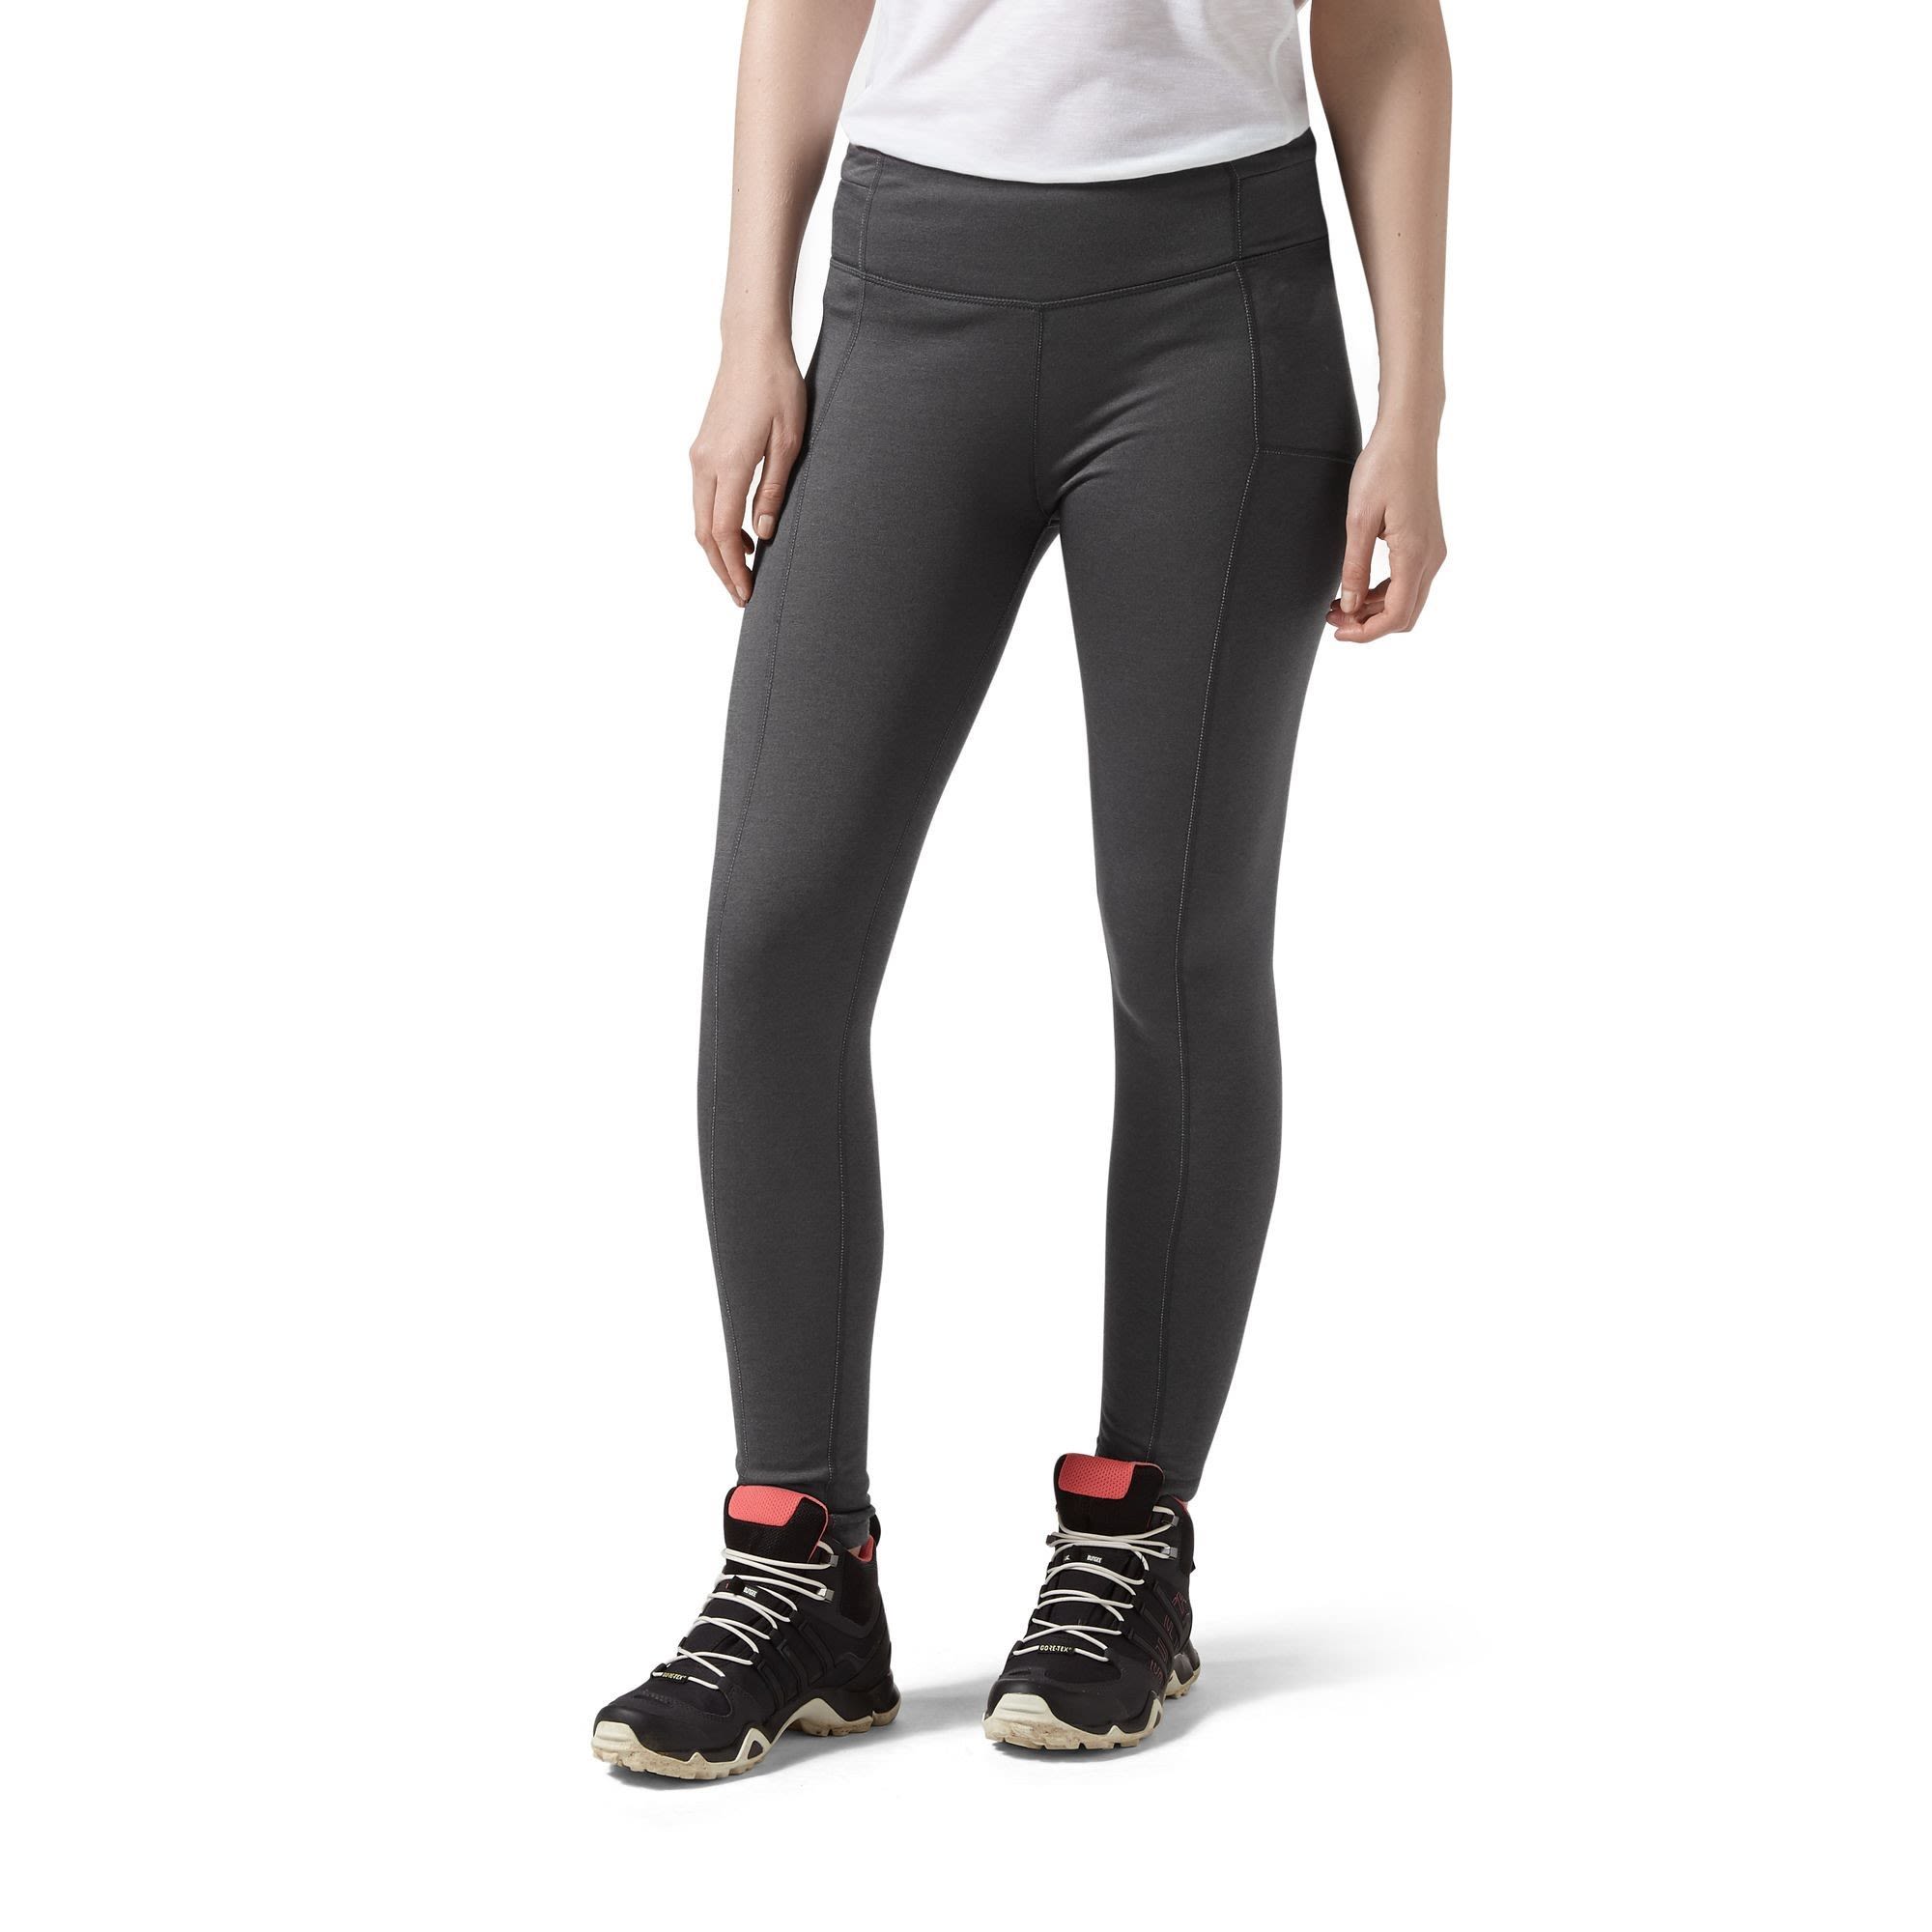 Craghoppers Bequeme thermoregulierende Damen Hose Charcoal